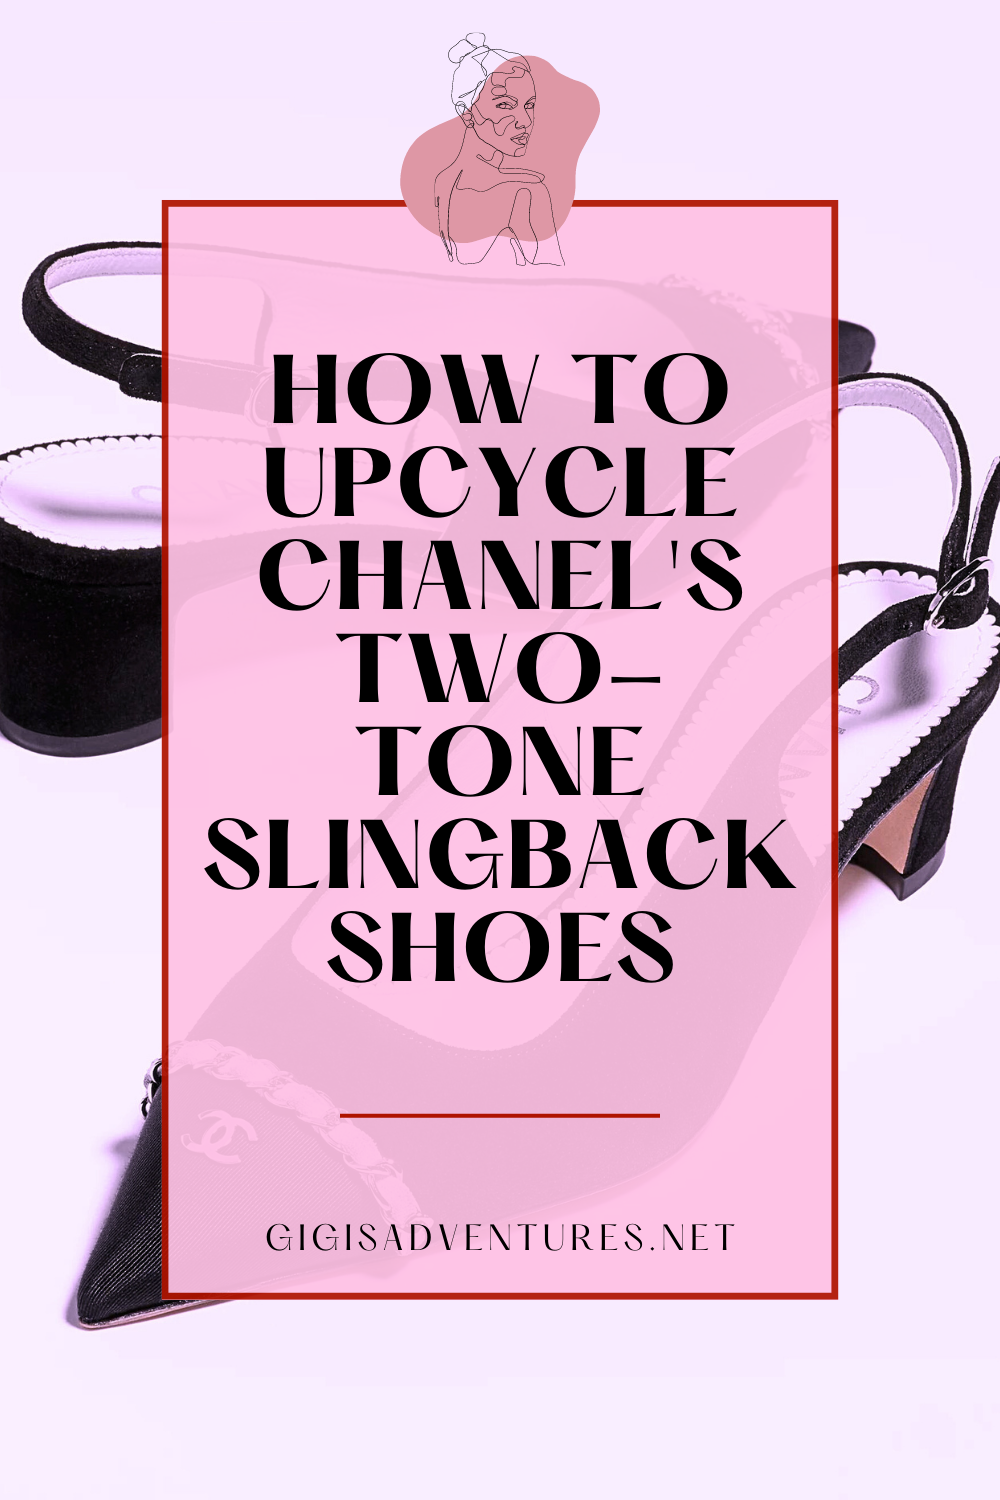 How To Upcycle Chanel's Two-Tone Slingback Shoes | Chanel Shoes Dupes